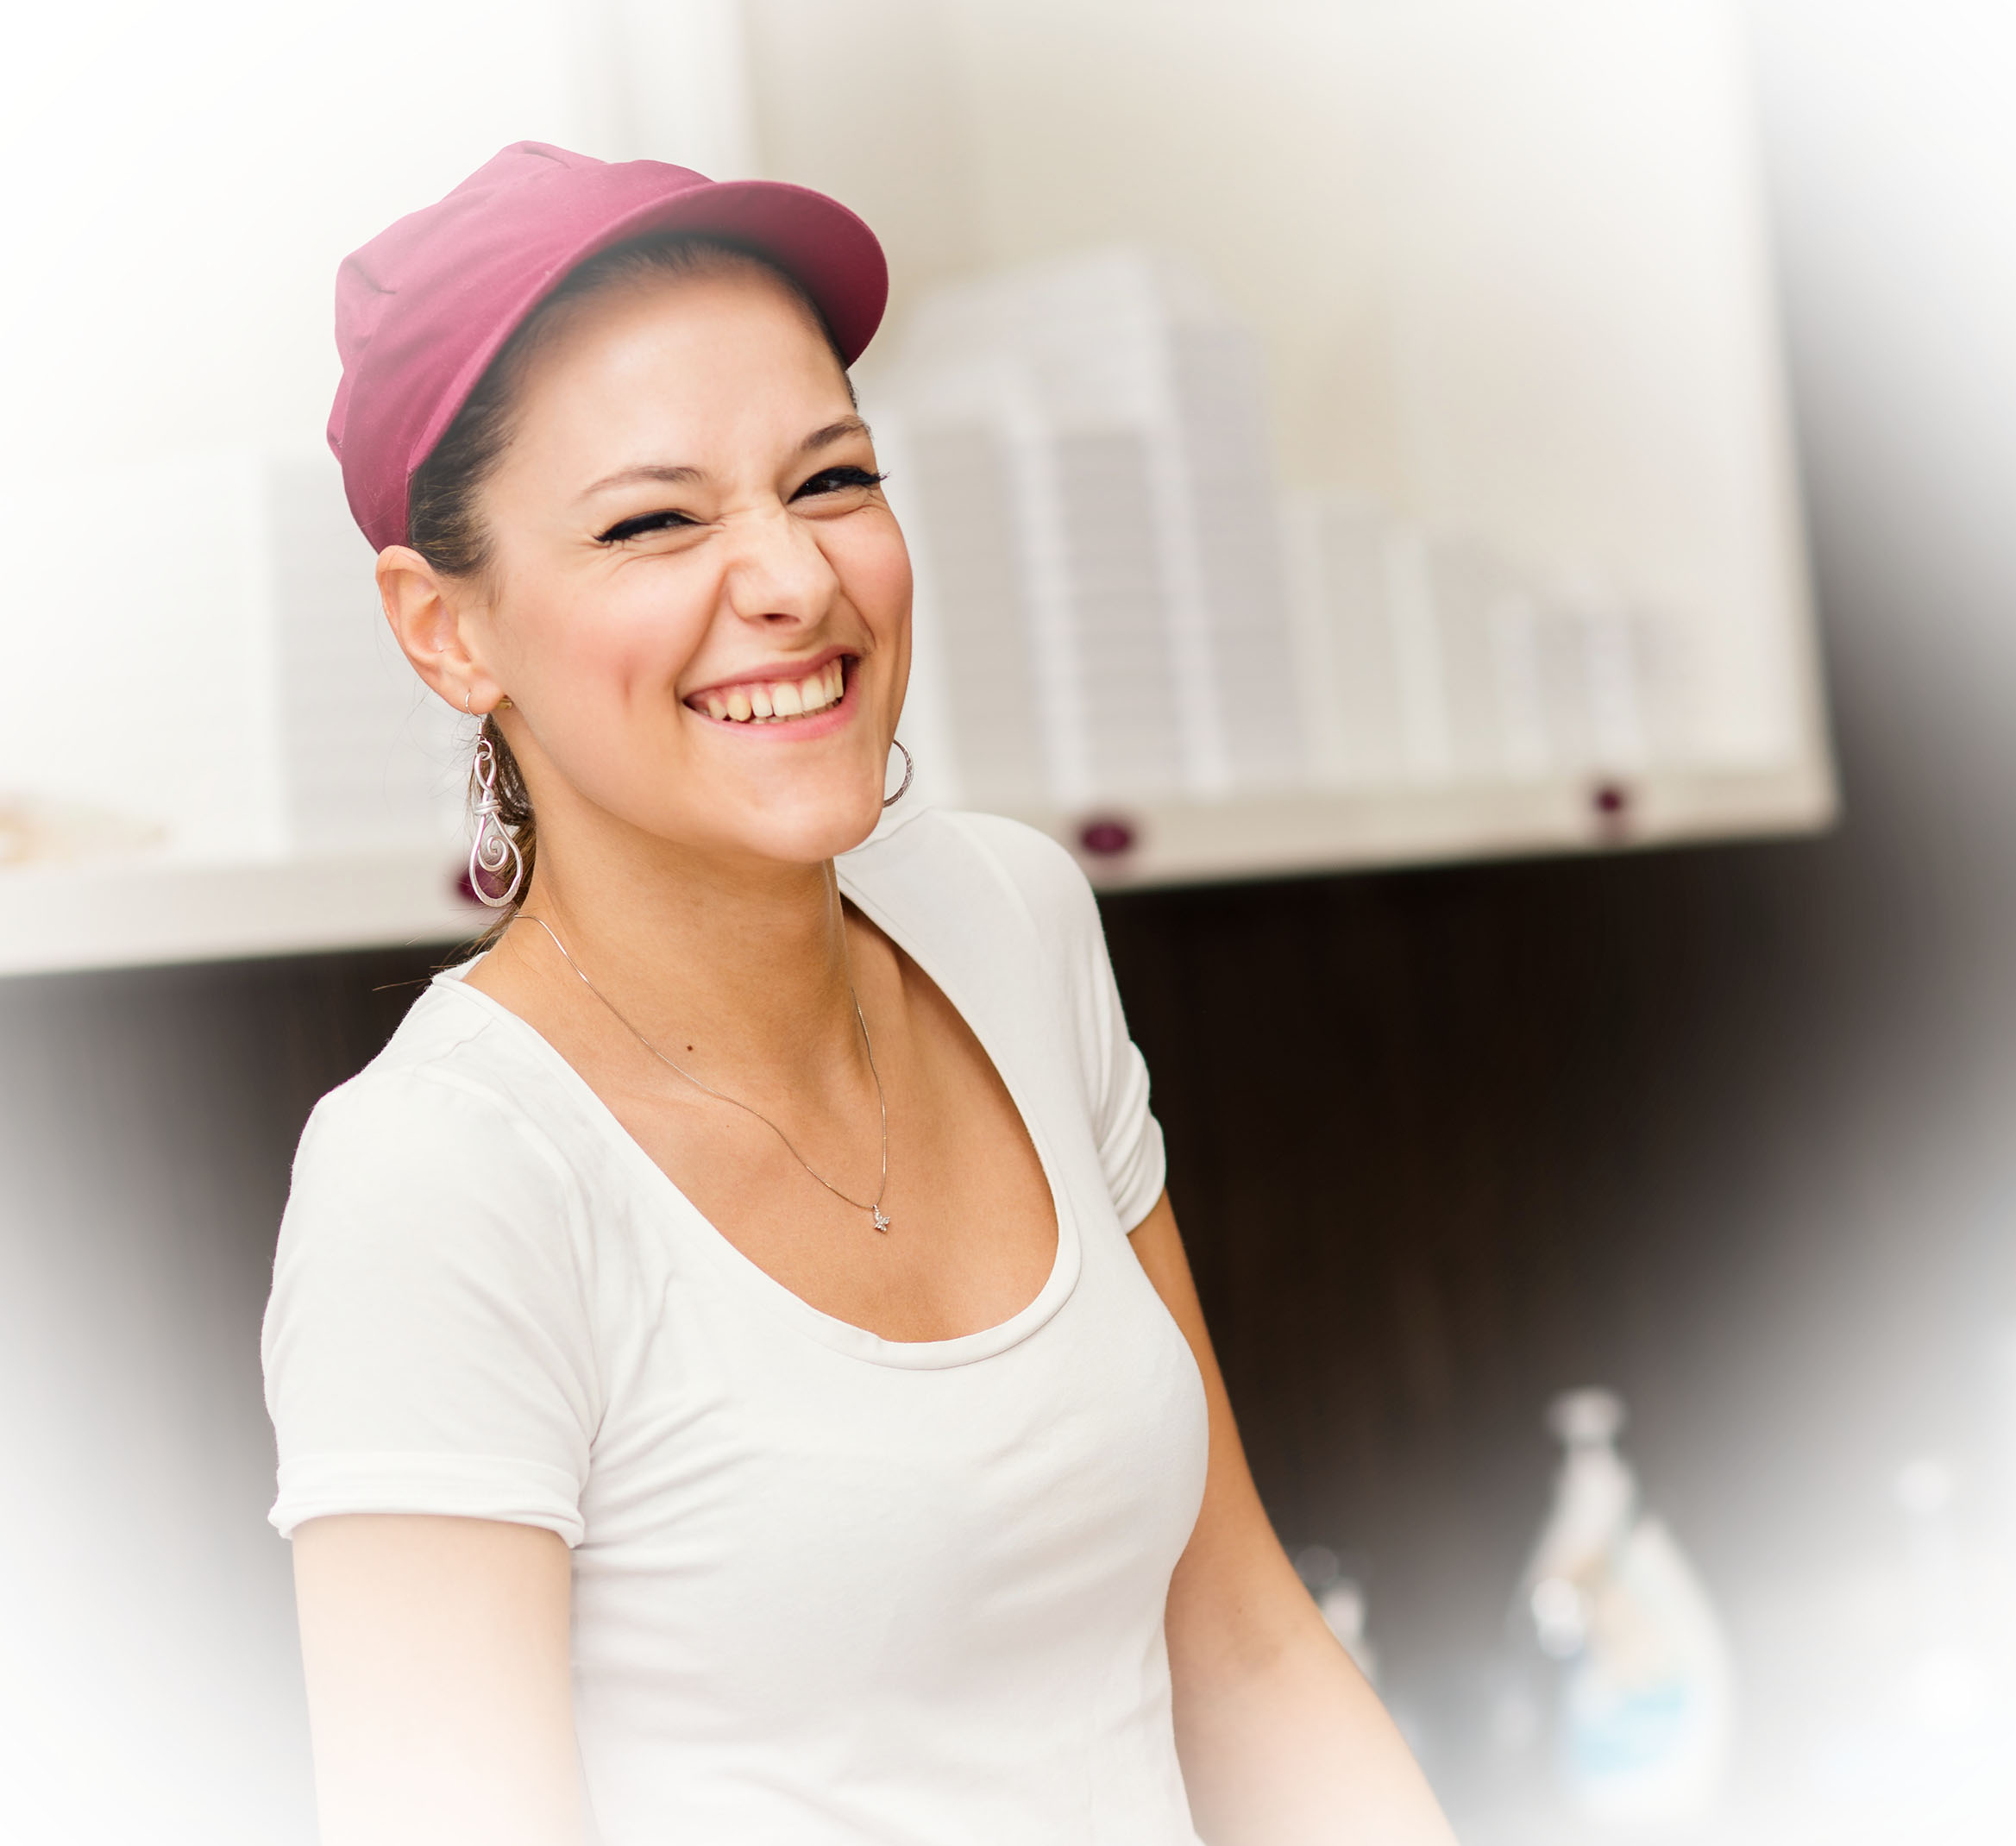 Young laughing saleswoman portrait inside ice cream shop.